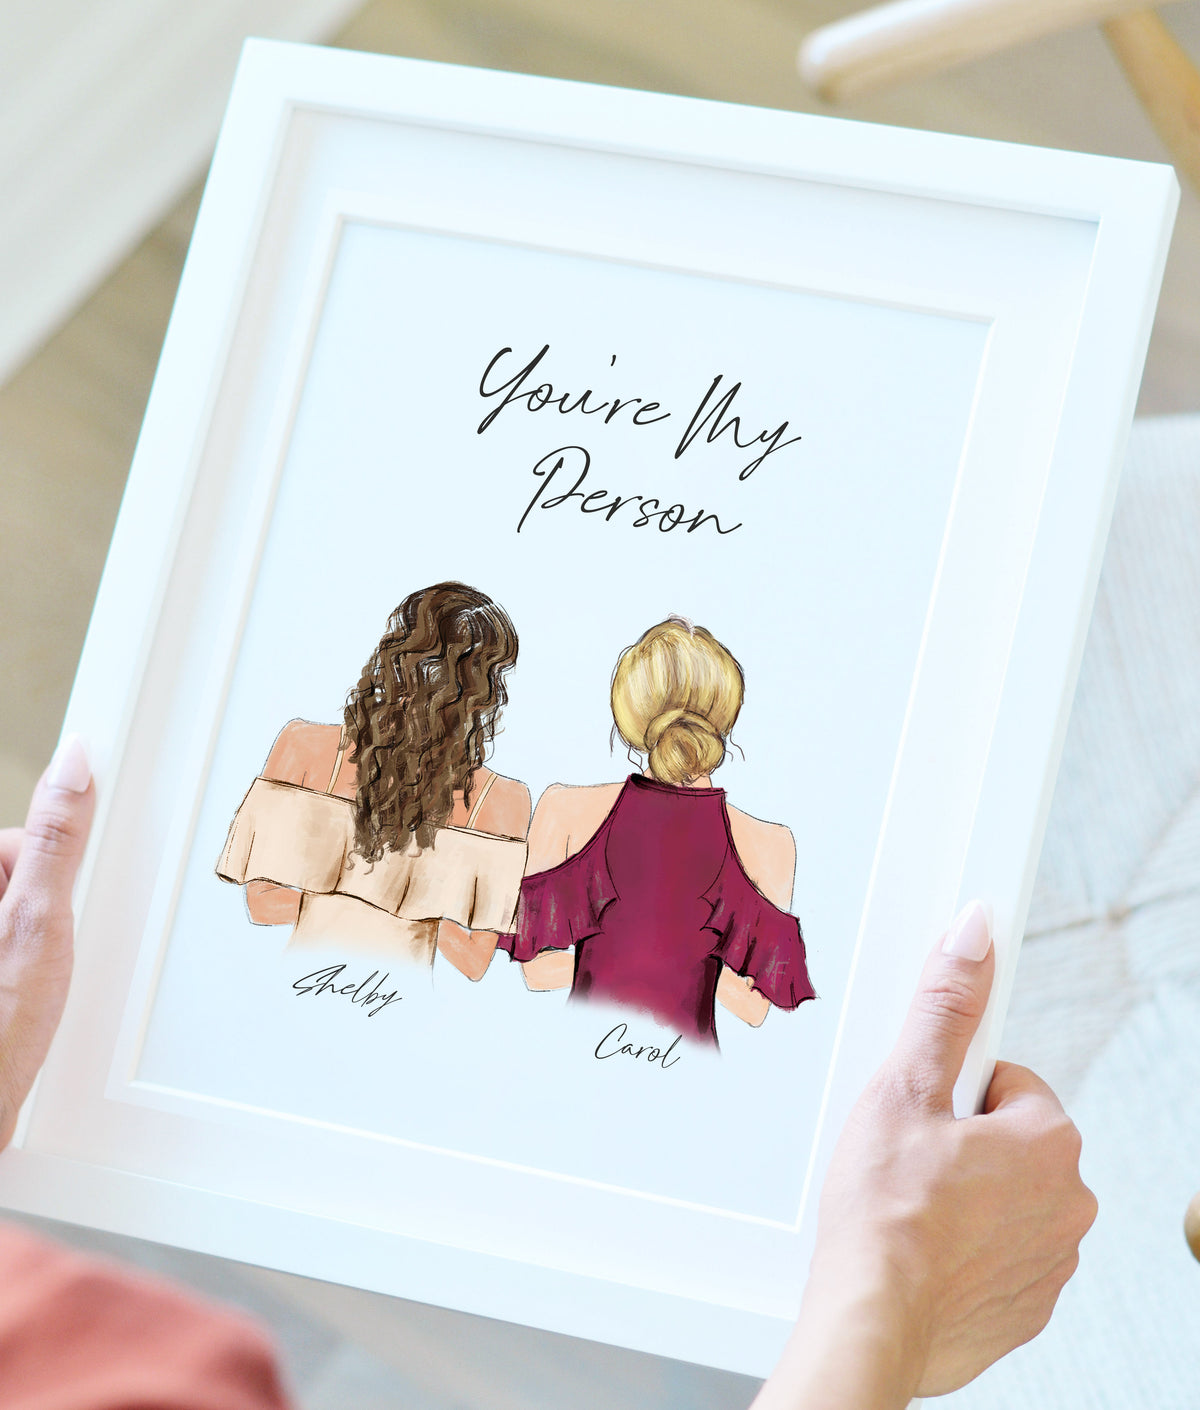 Gifts for Best Friends, Gift Ideas for Friends